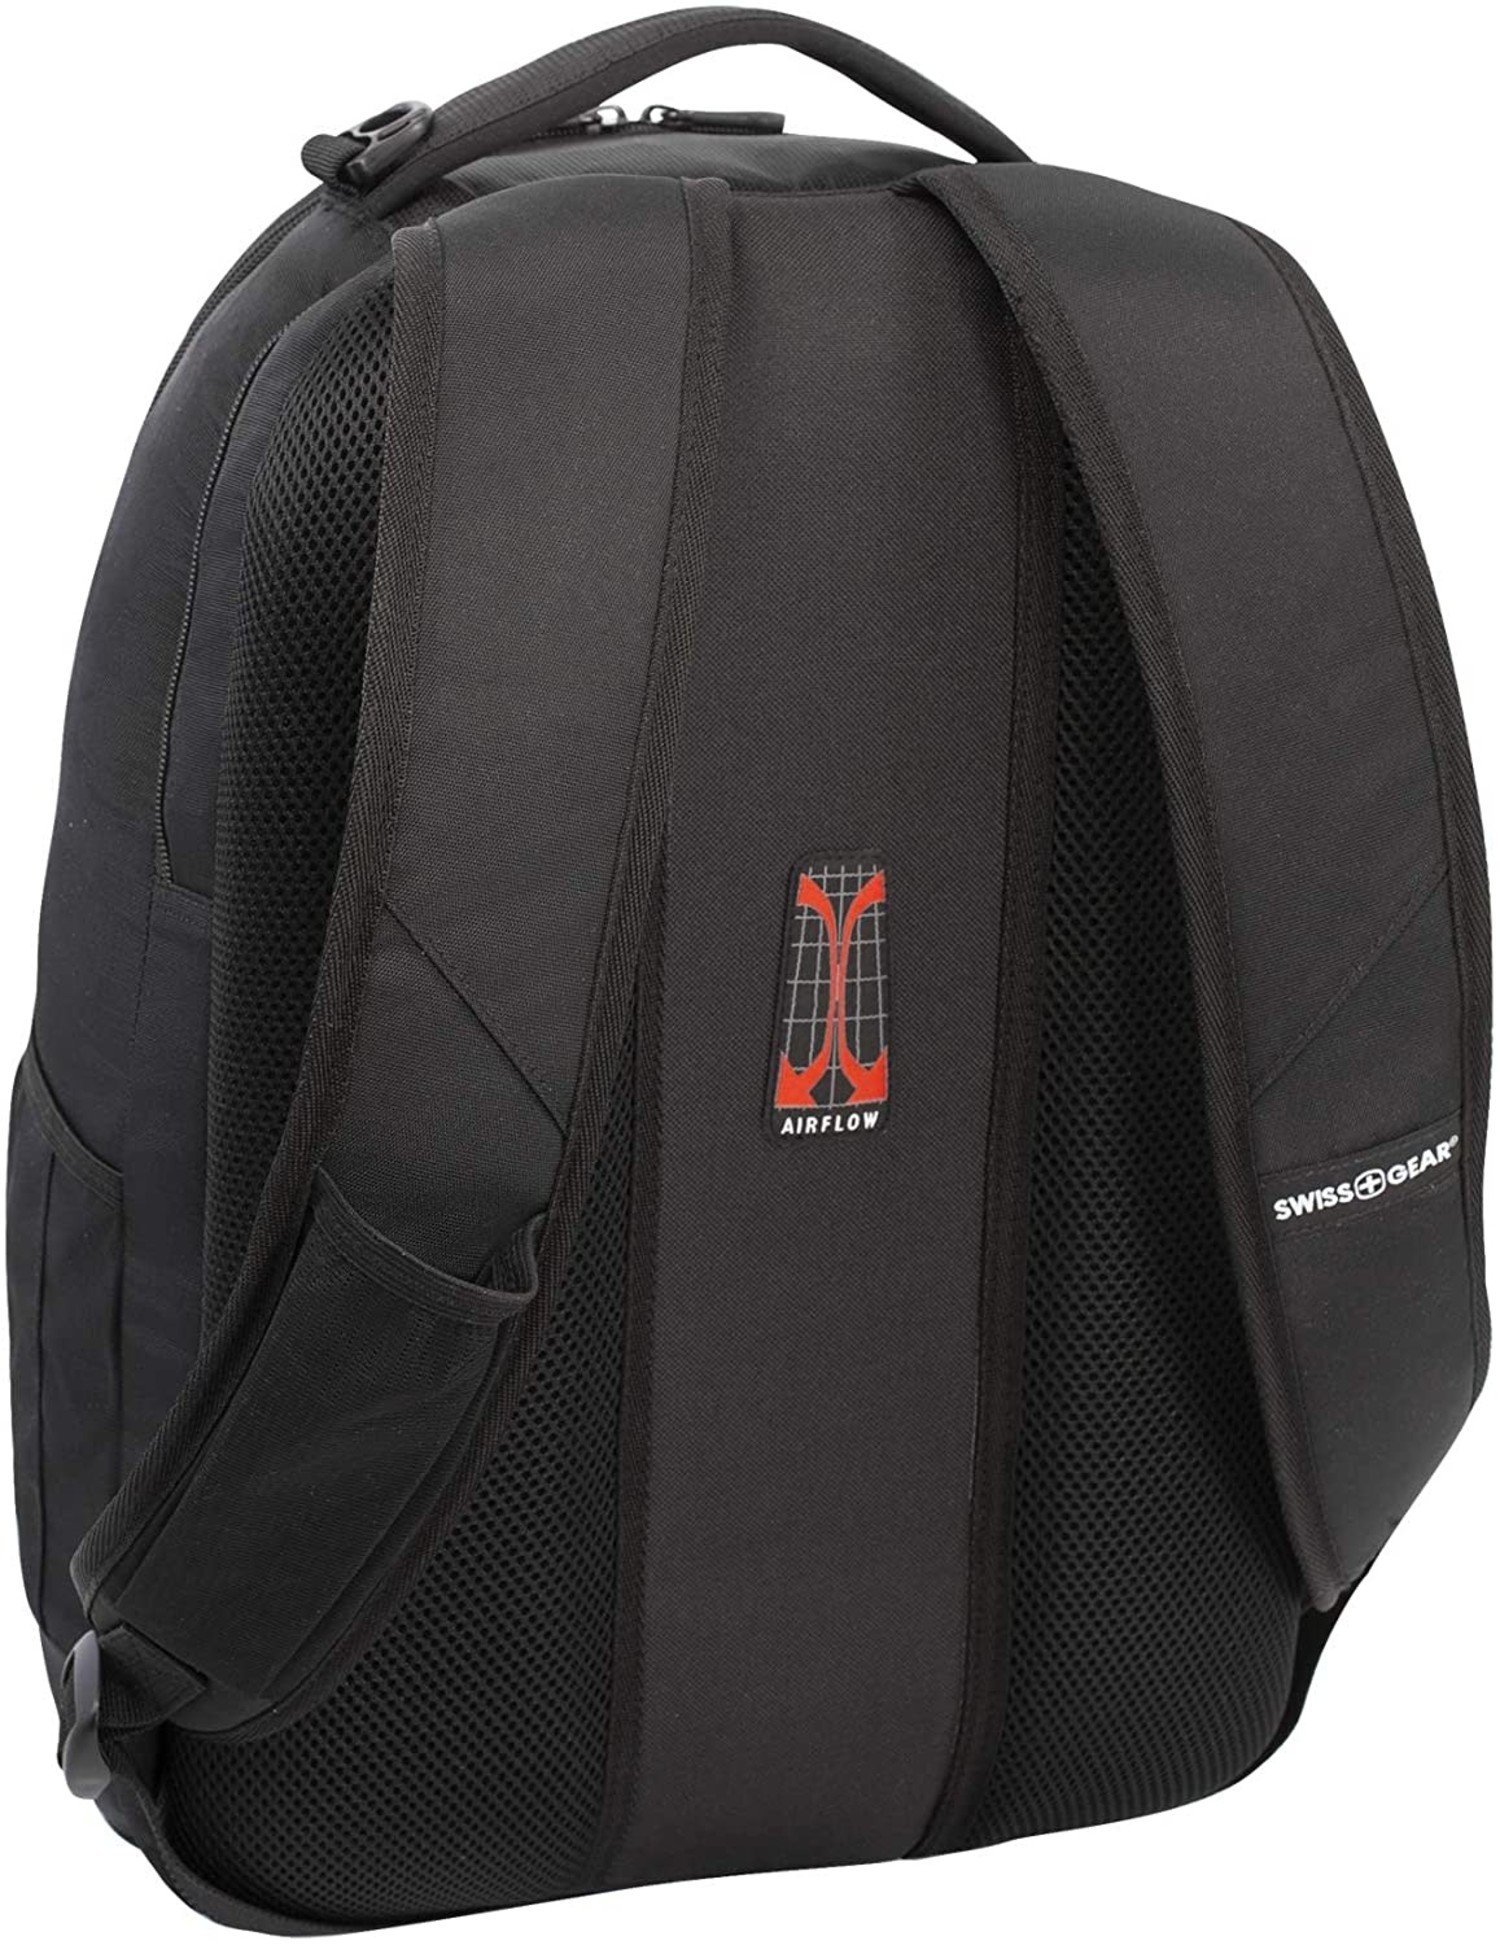 Swiss Gear 17.3 Laptop Backpack - Just Bags Luggage Center